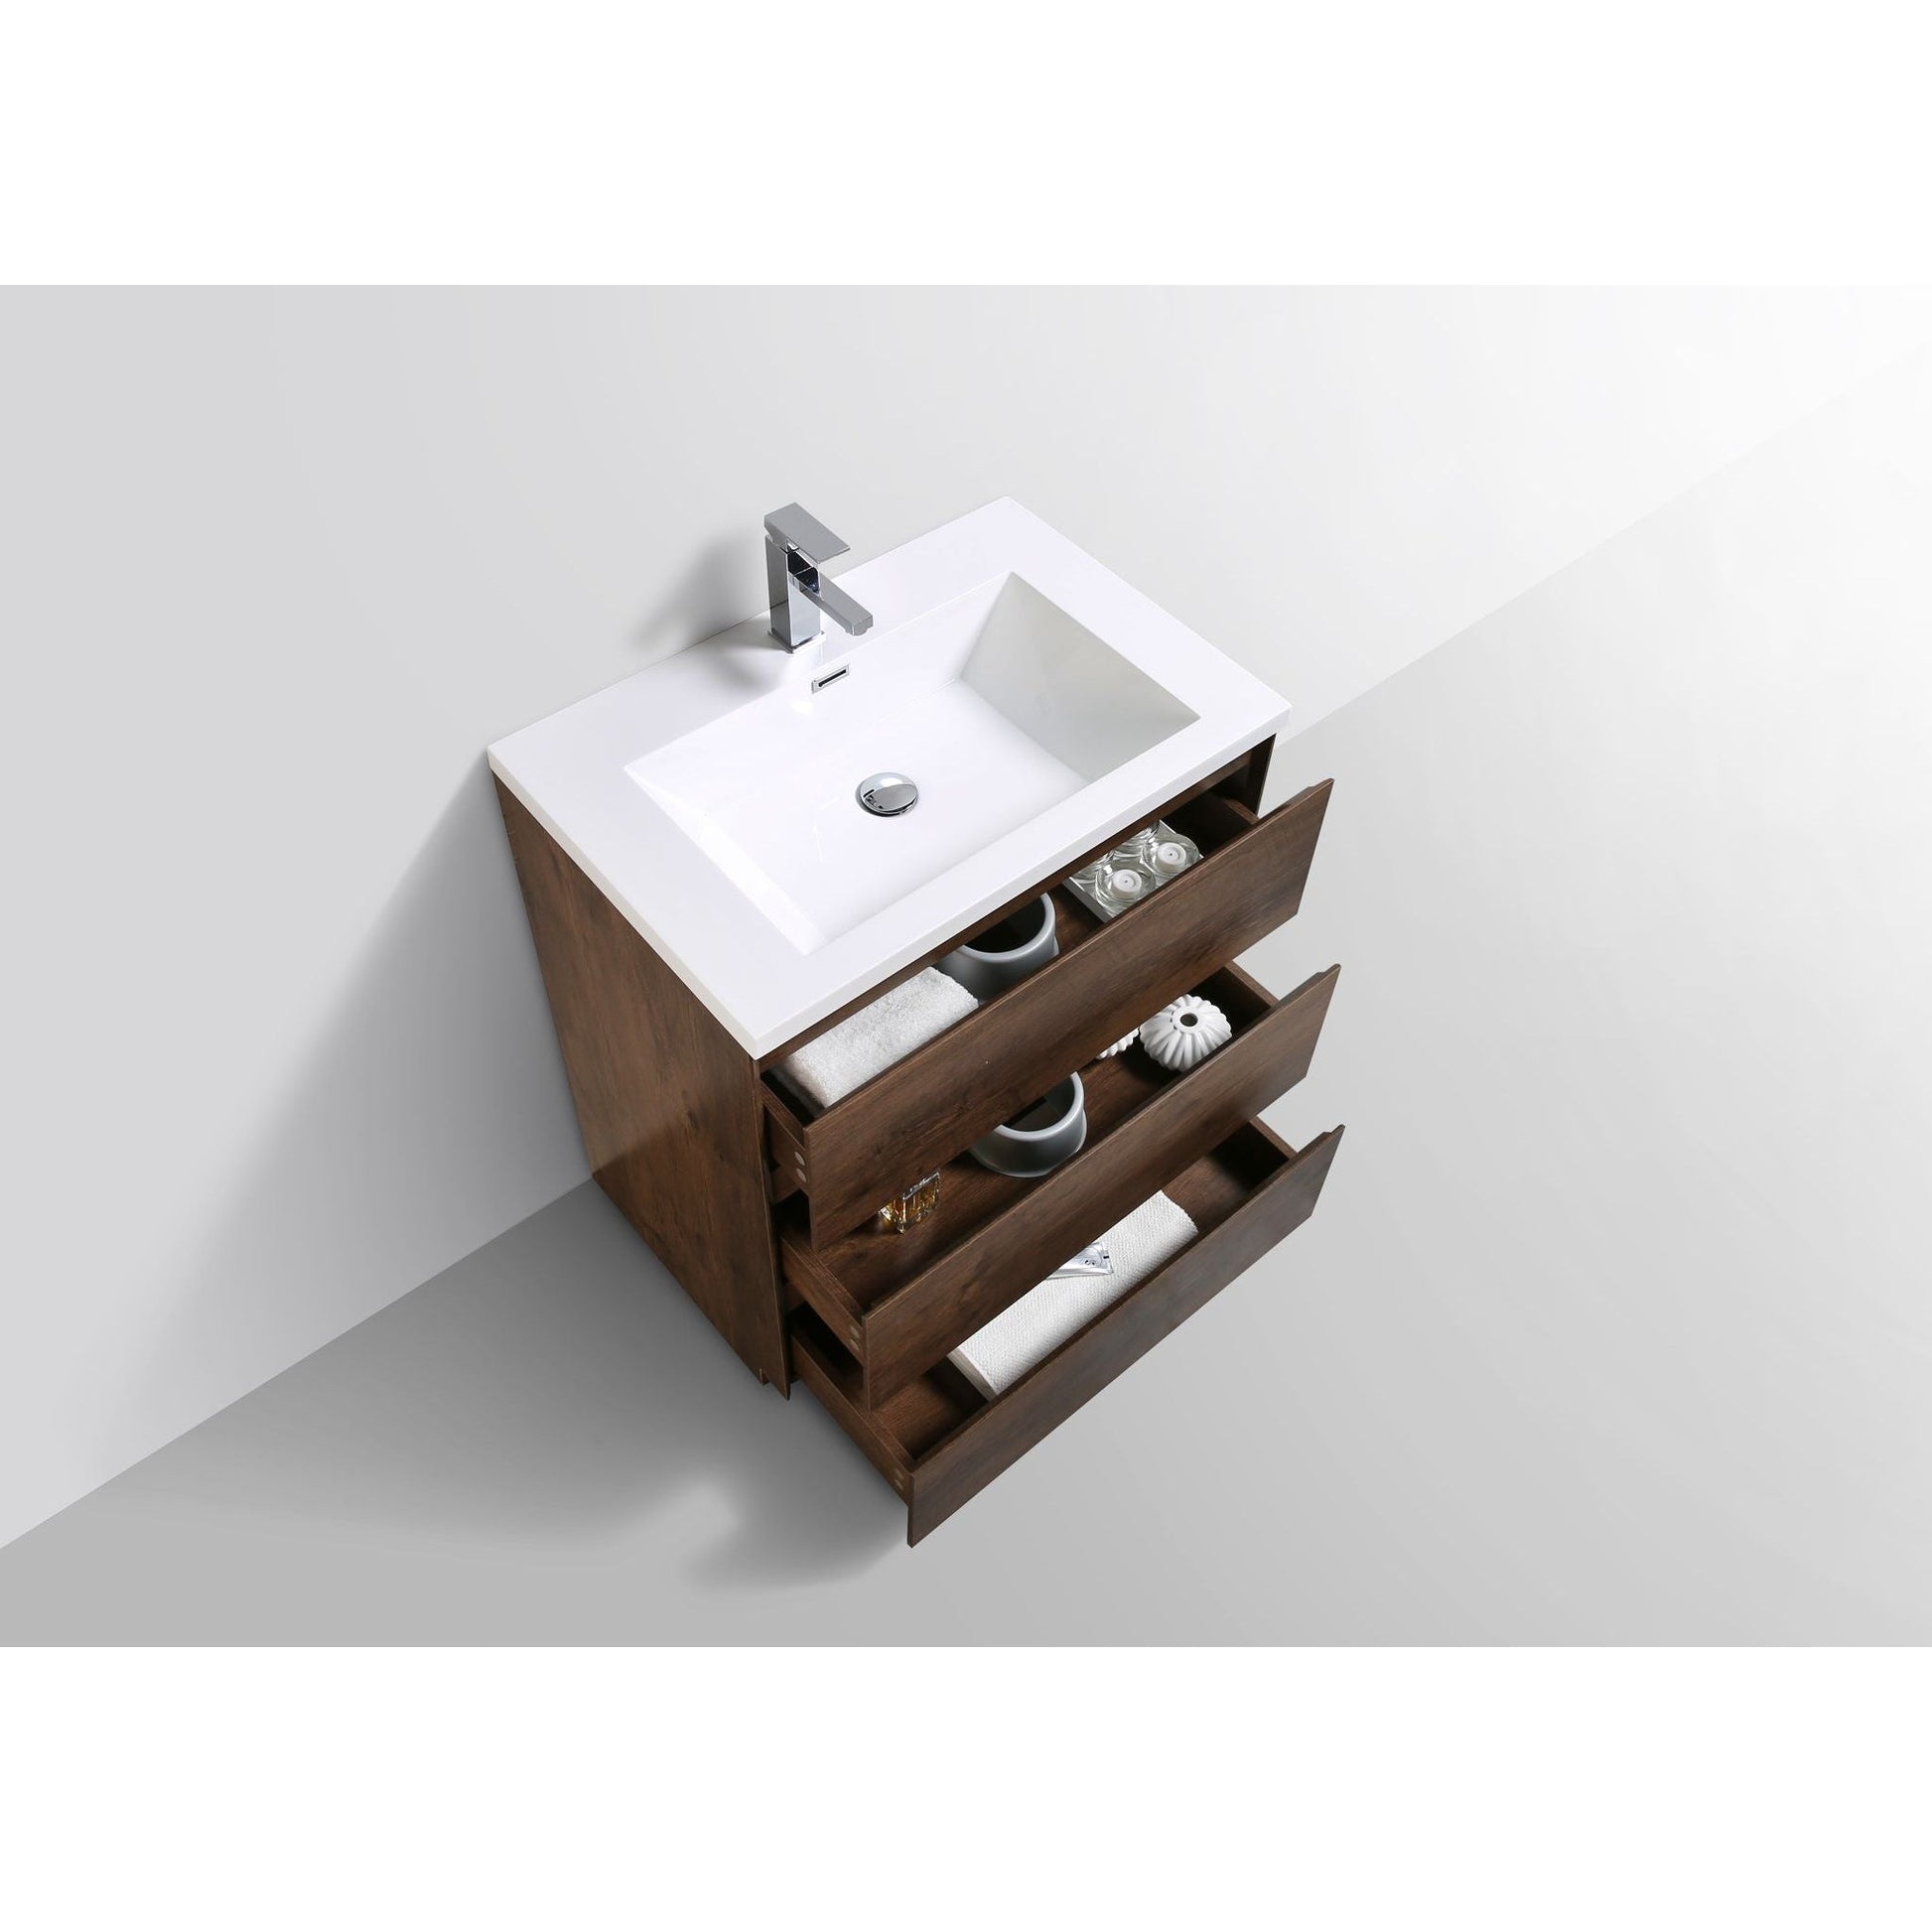 Moreno Bath Angeles 30" Rosewood Freestanding Vanity With Single Reinforced White Acrylic Sink